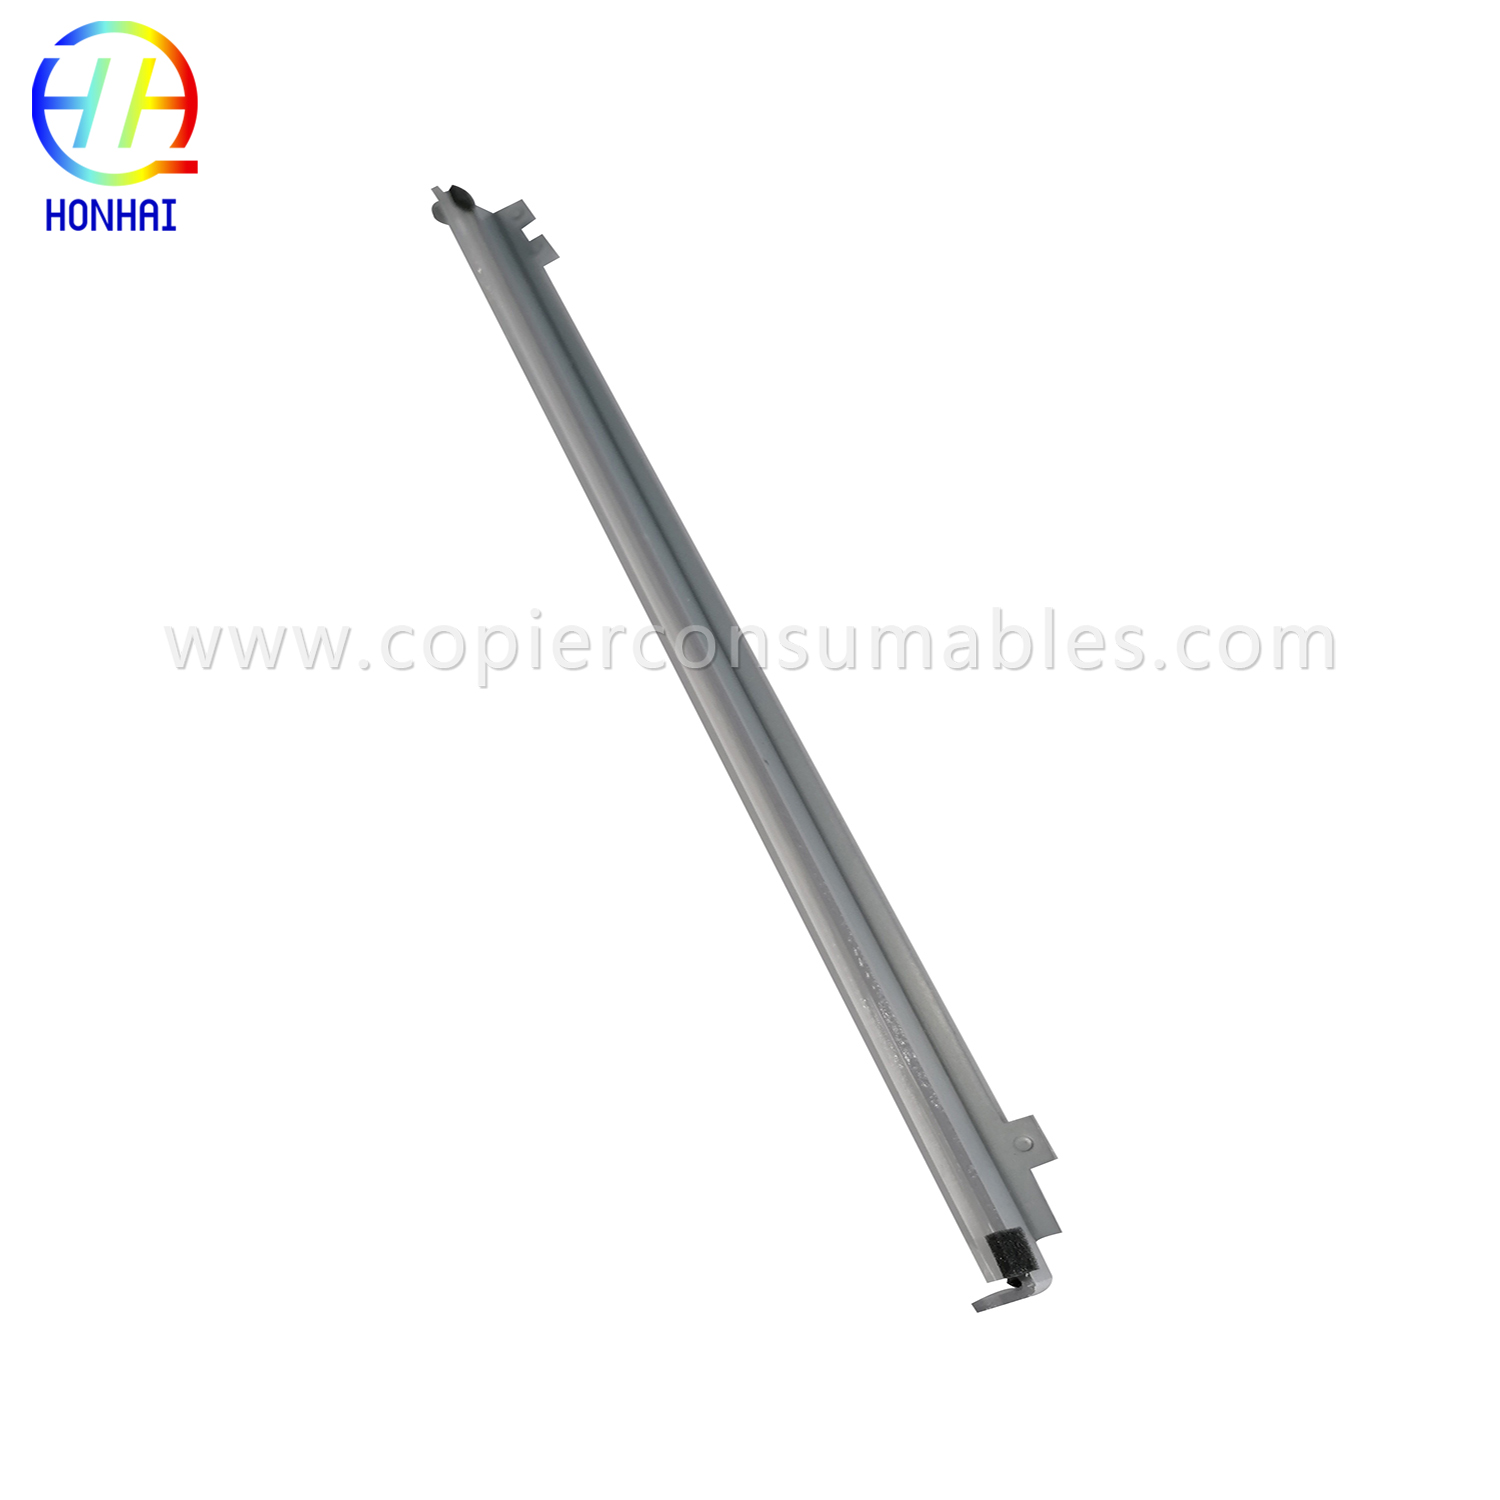 TRANSFER BELT CLEANING BLADE FOR HP CP5225 CE516A (3) เพิ่มเติม